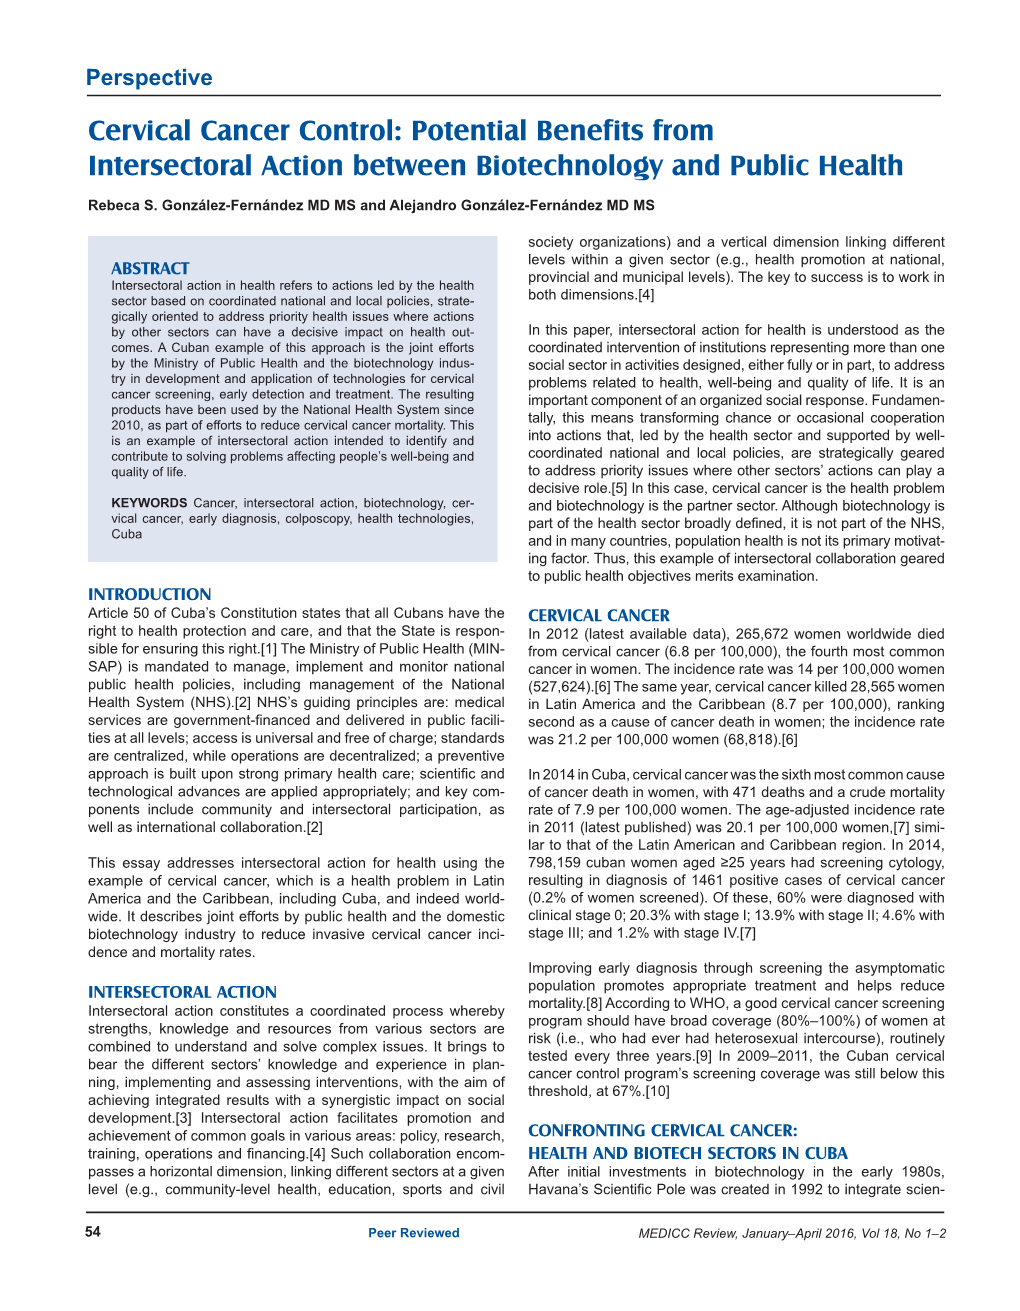 Cervical Cancer Control: Potential Benefits from Intersectoral Action Between Biotechnology and Public Health